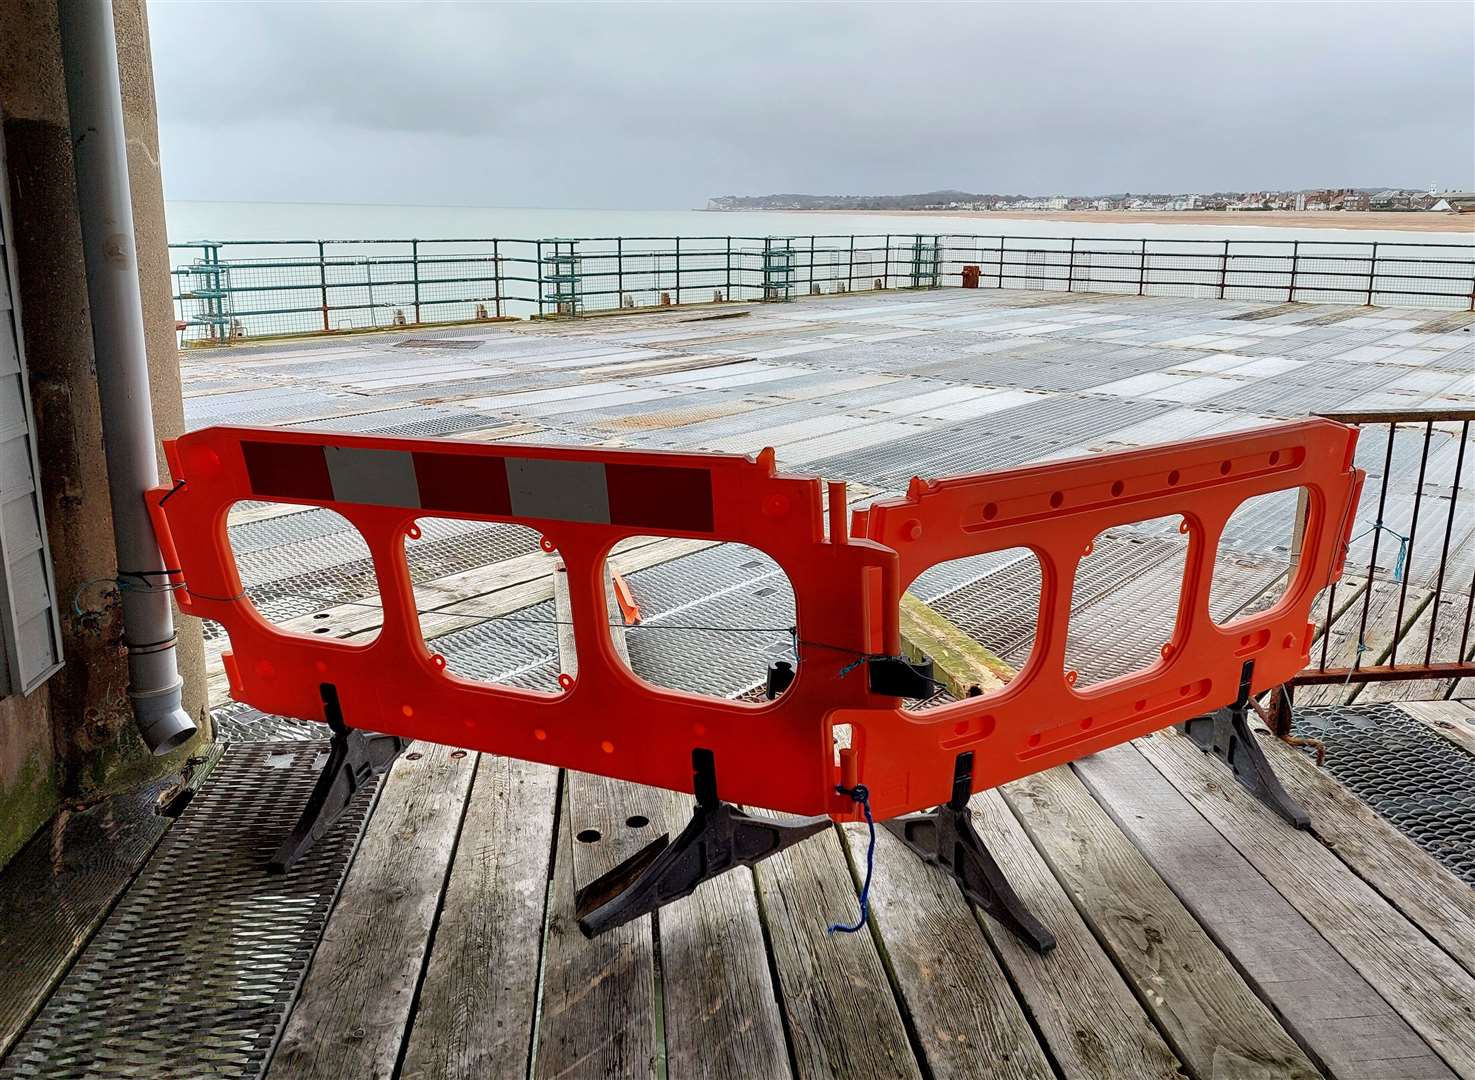 Dover District Council hopes to fully reopen Deal Pier soon